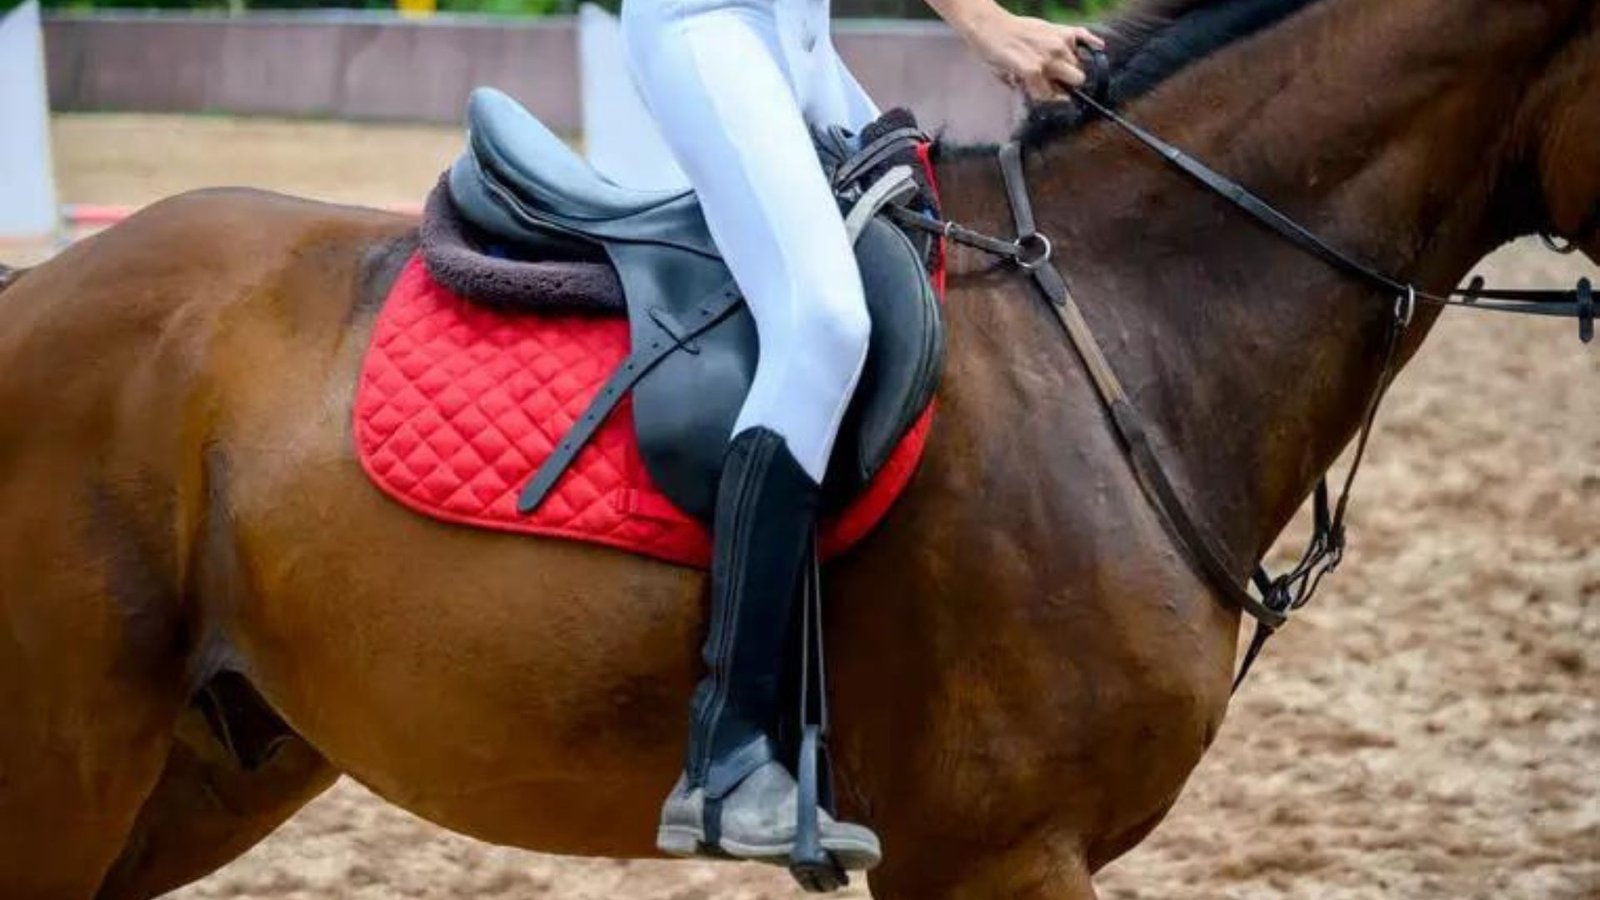 this image shows Horse Riding Boots